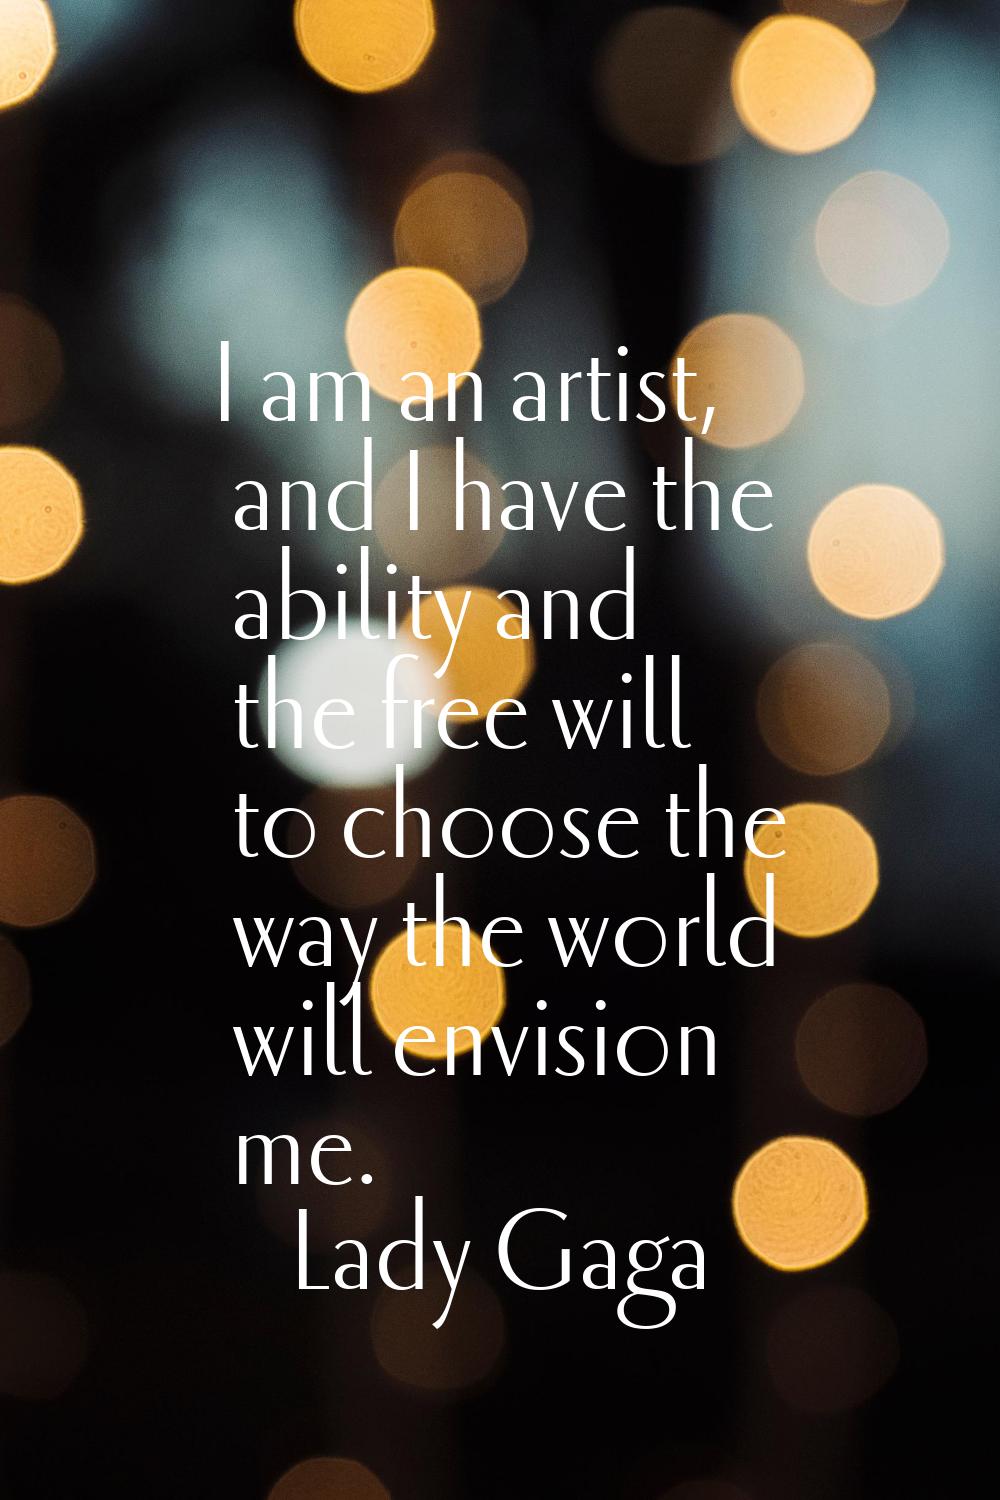 I am an artist, and I have the ability and the free will to choose the way the world will envision 